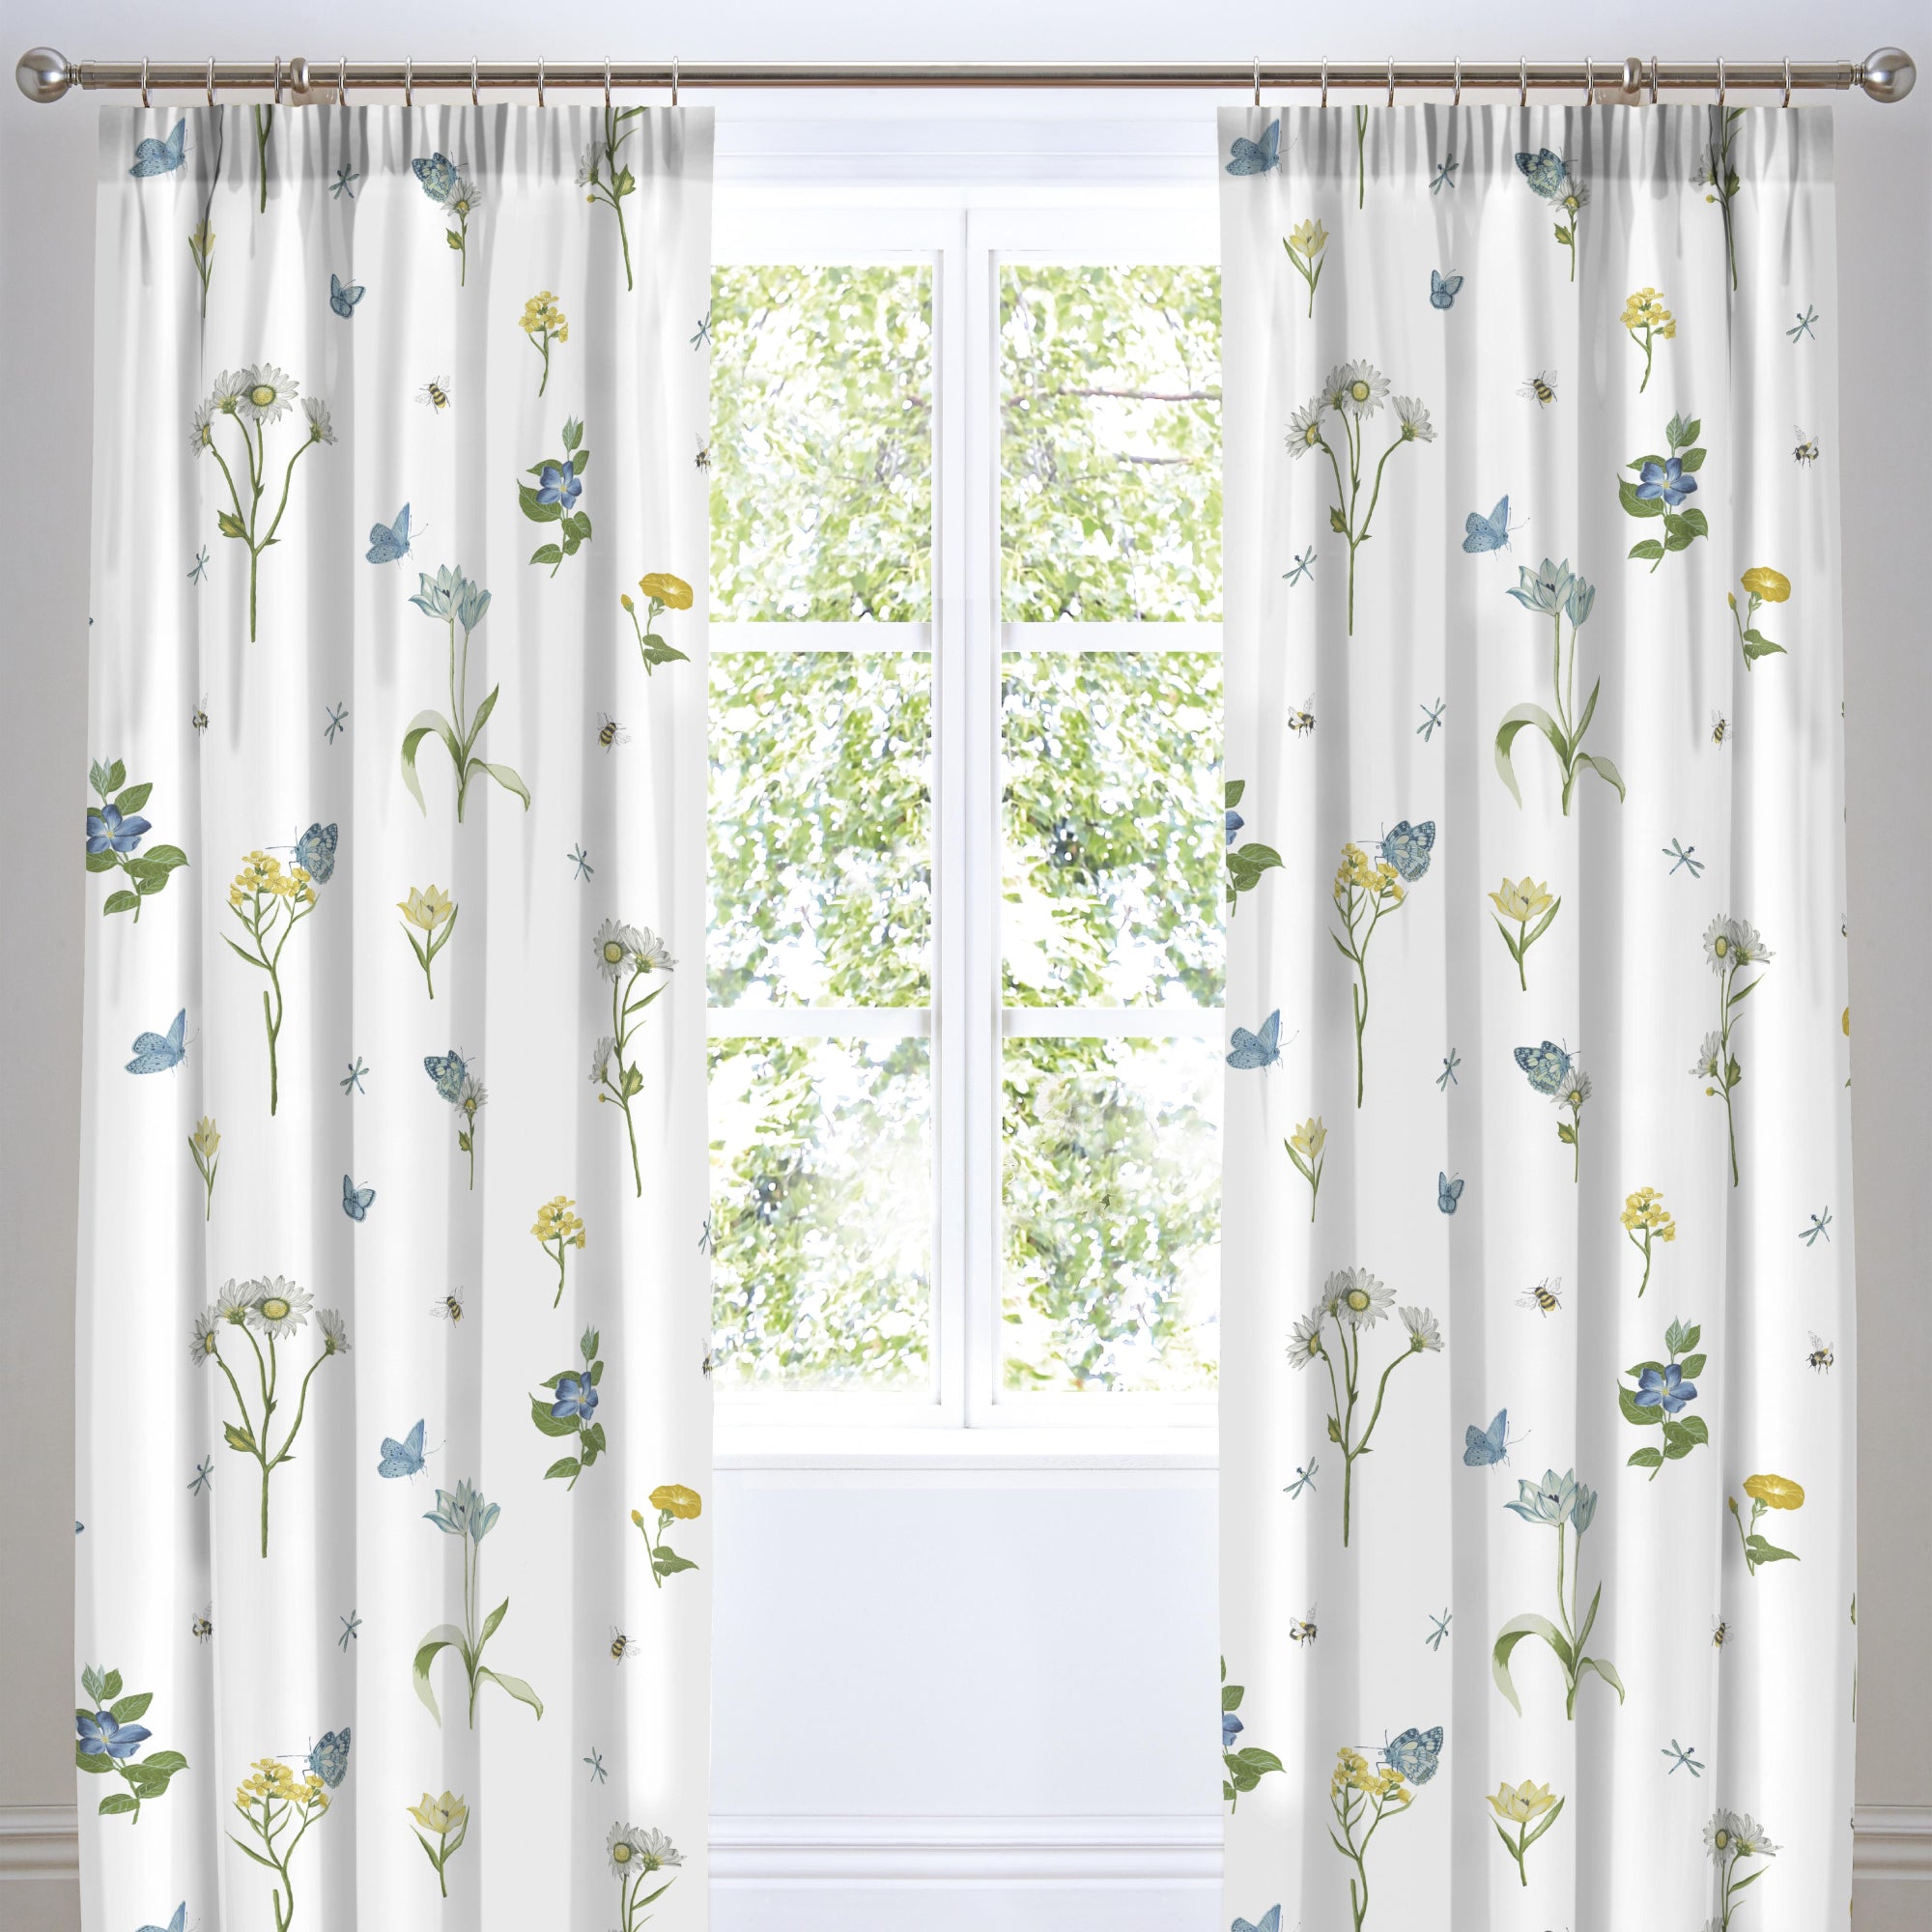 Pair of Pencil Pleat Curtains Emelia by Dreams & Drapes Design in Blue